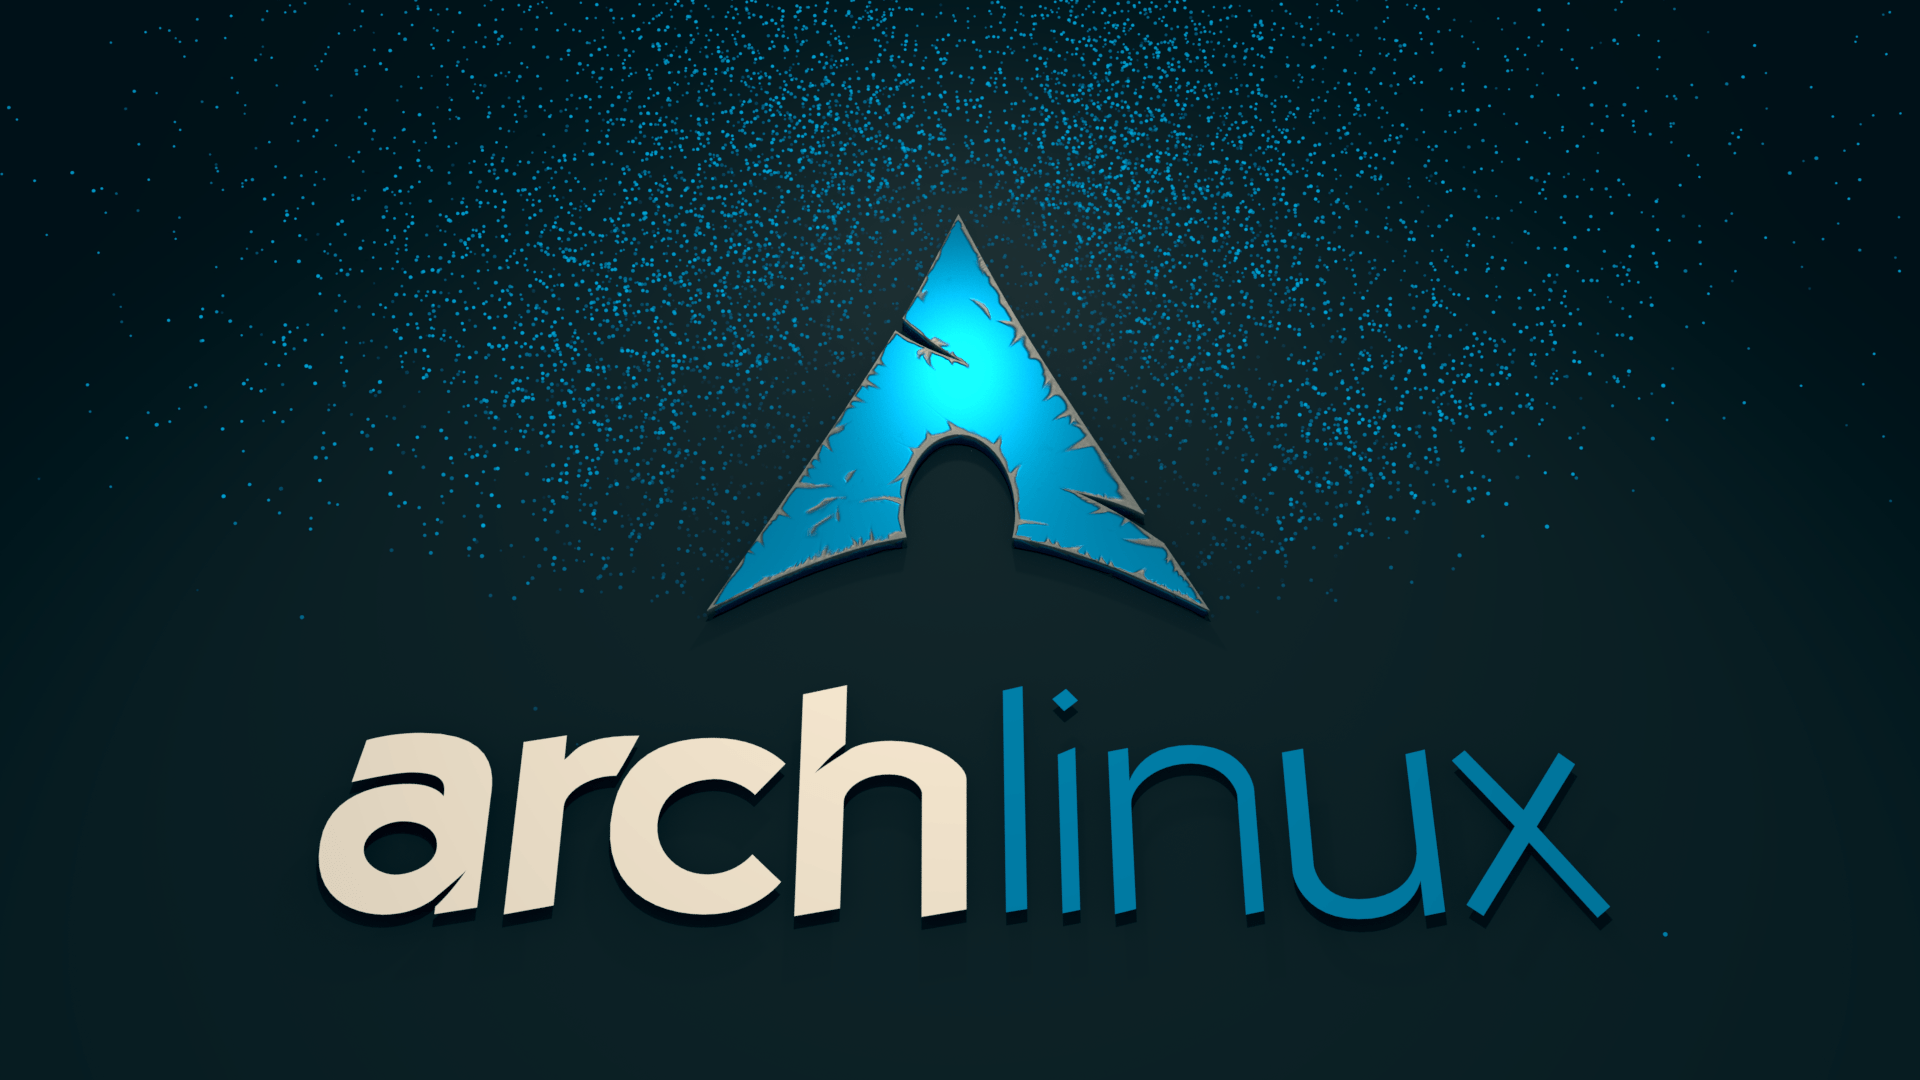 Yet another Arch Linux wallpaper